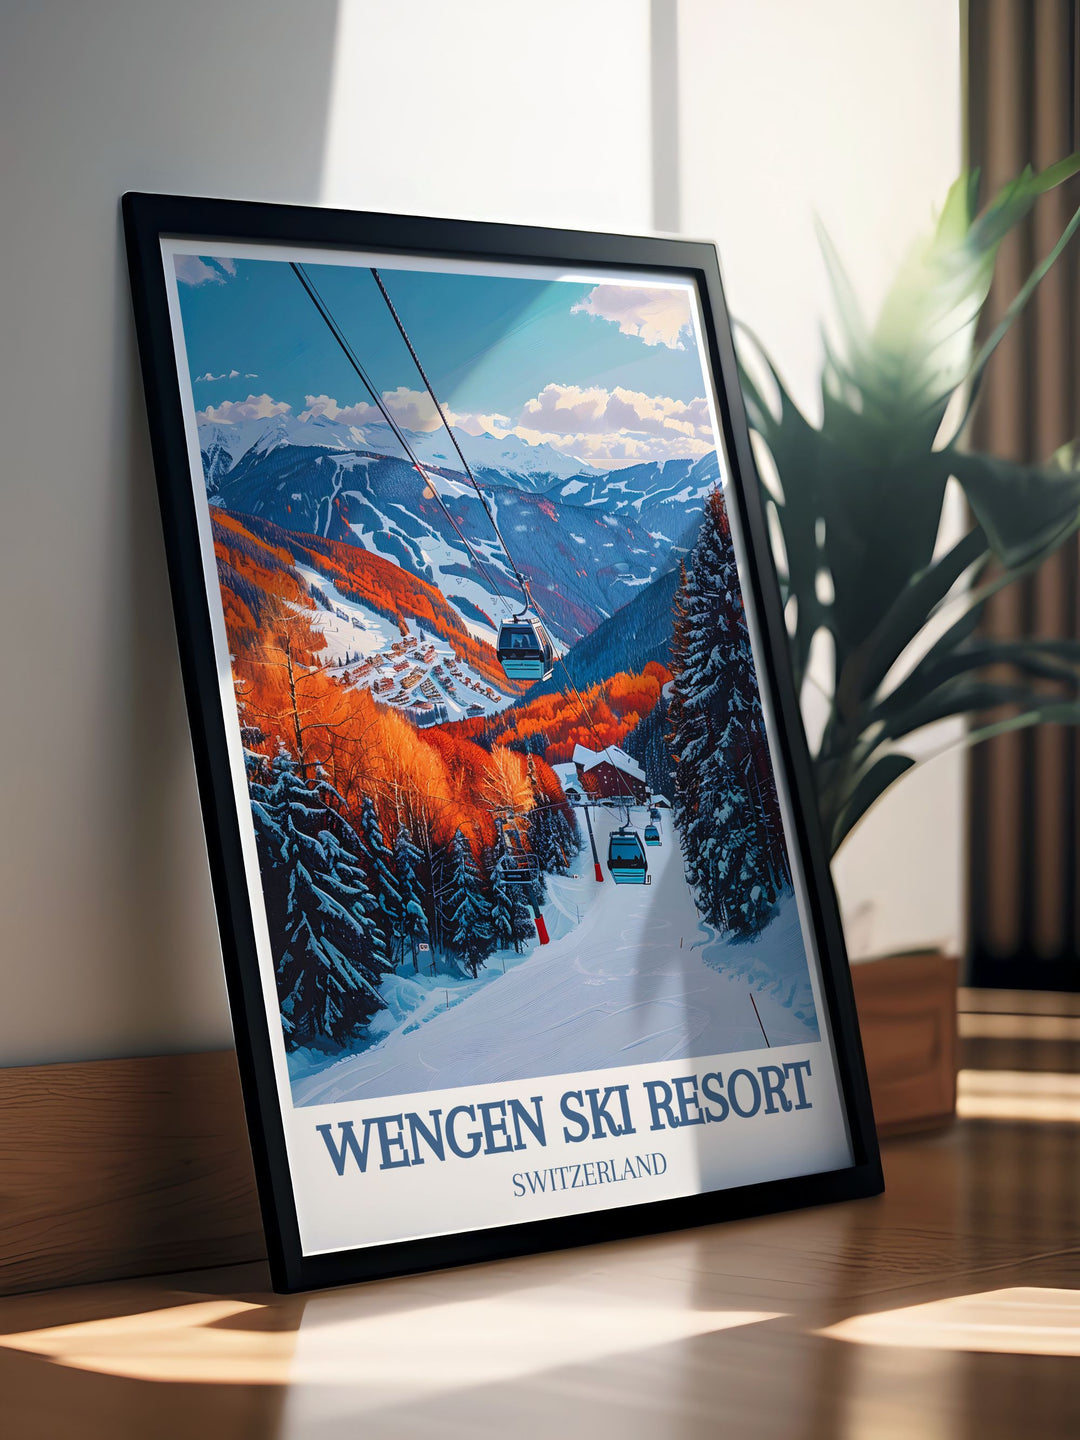 Canvas art depicting the thrilling adventures of Grindelwald, Switzerland. Featuring the imposing Eiger mountain and the villages vibrant atmosphere, this artwork is perfect for adding a sense of excitement to your home or office space.